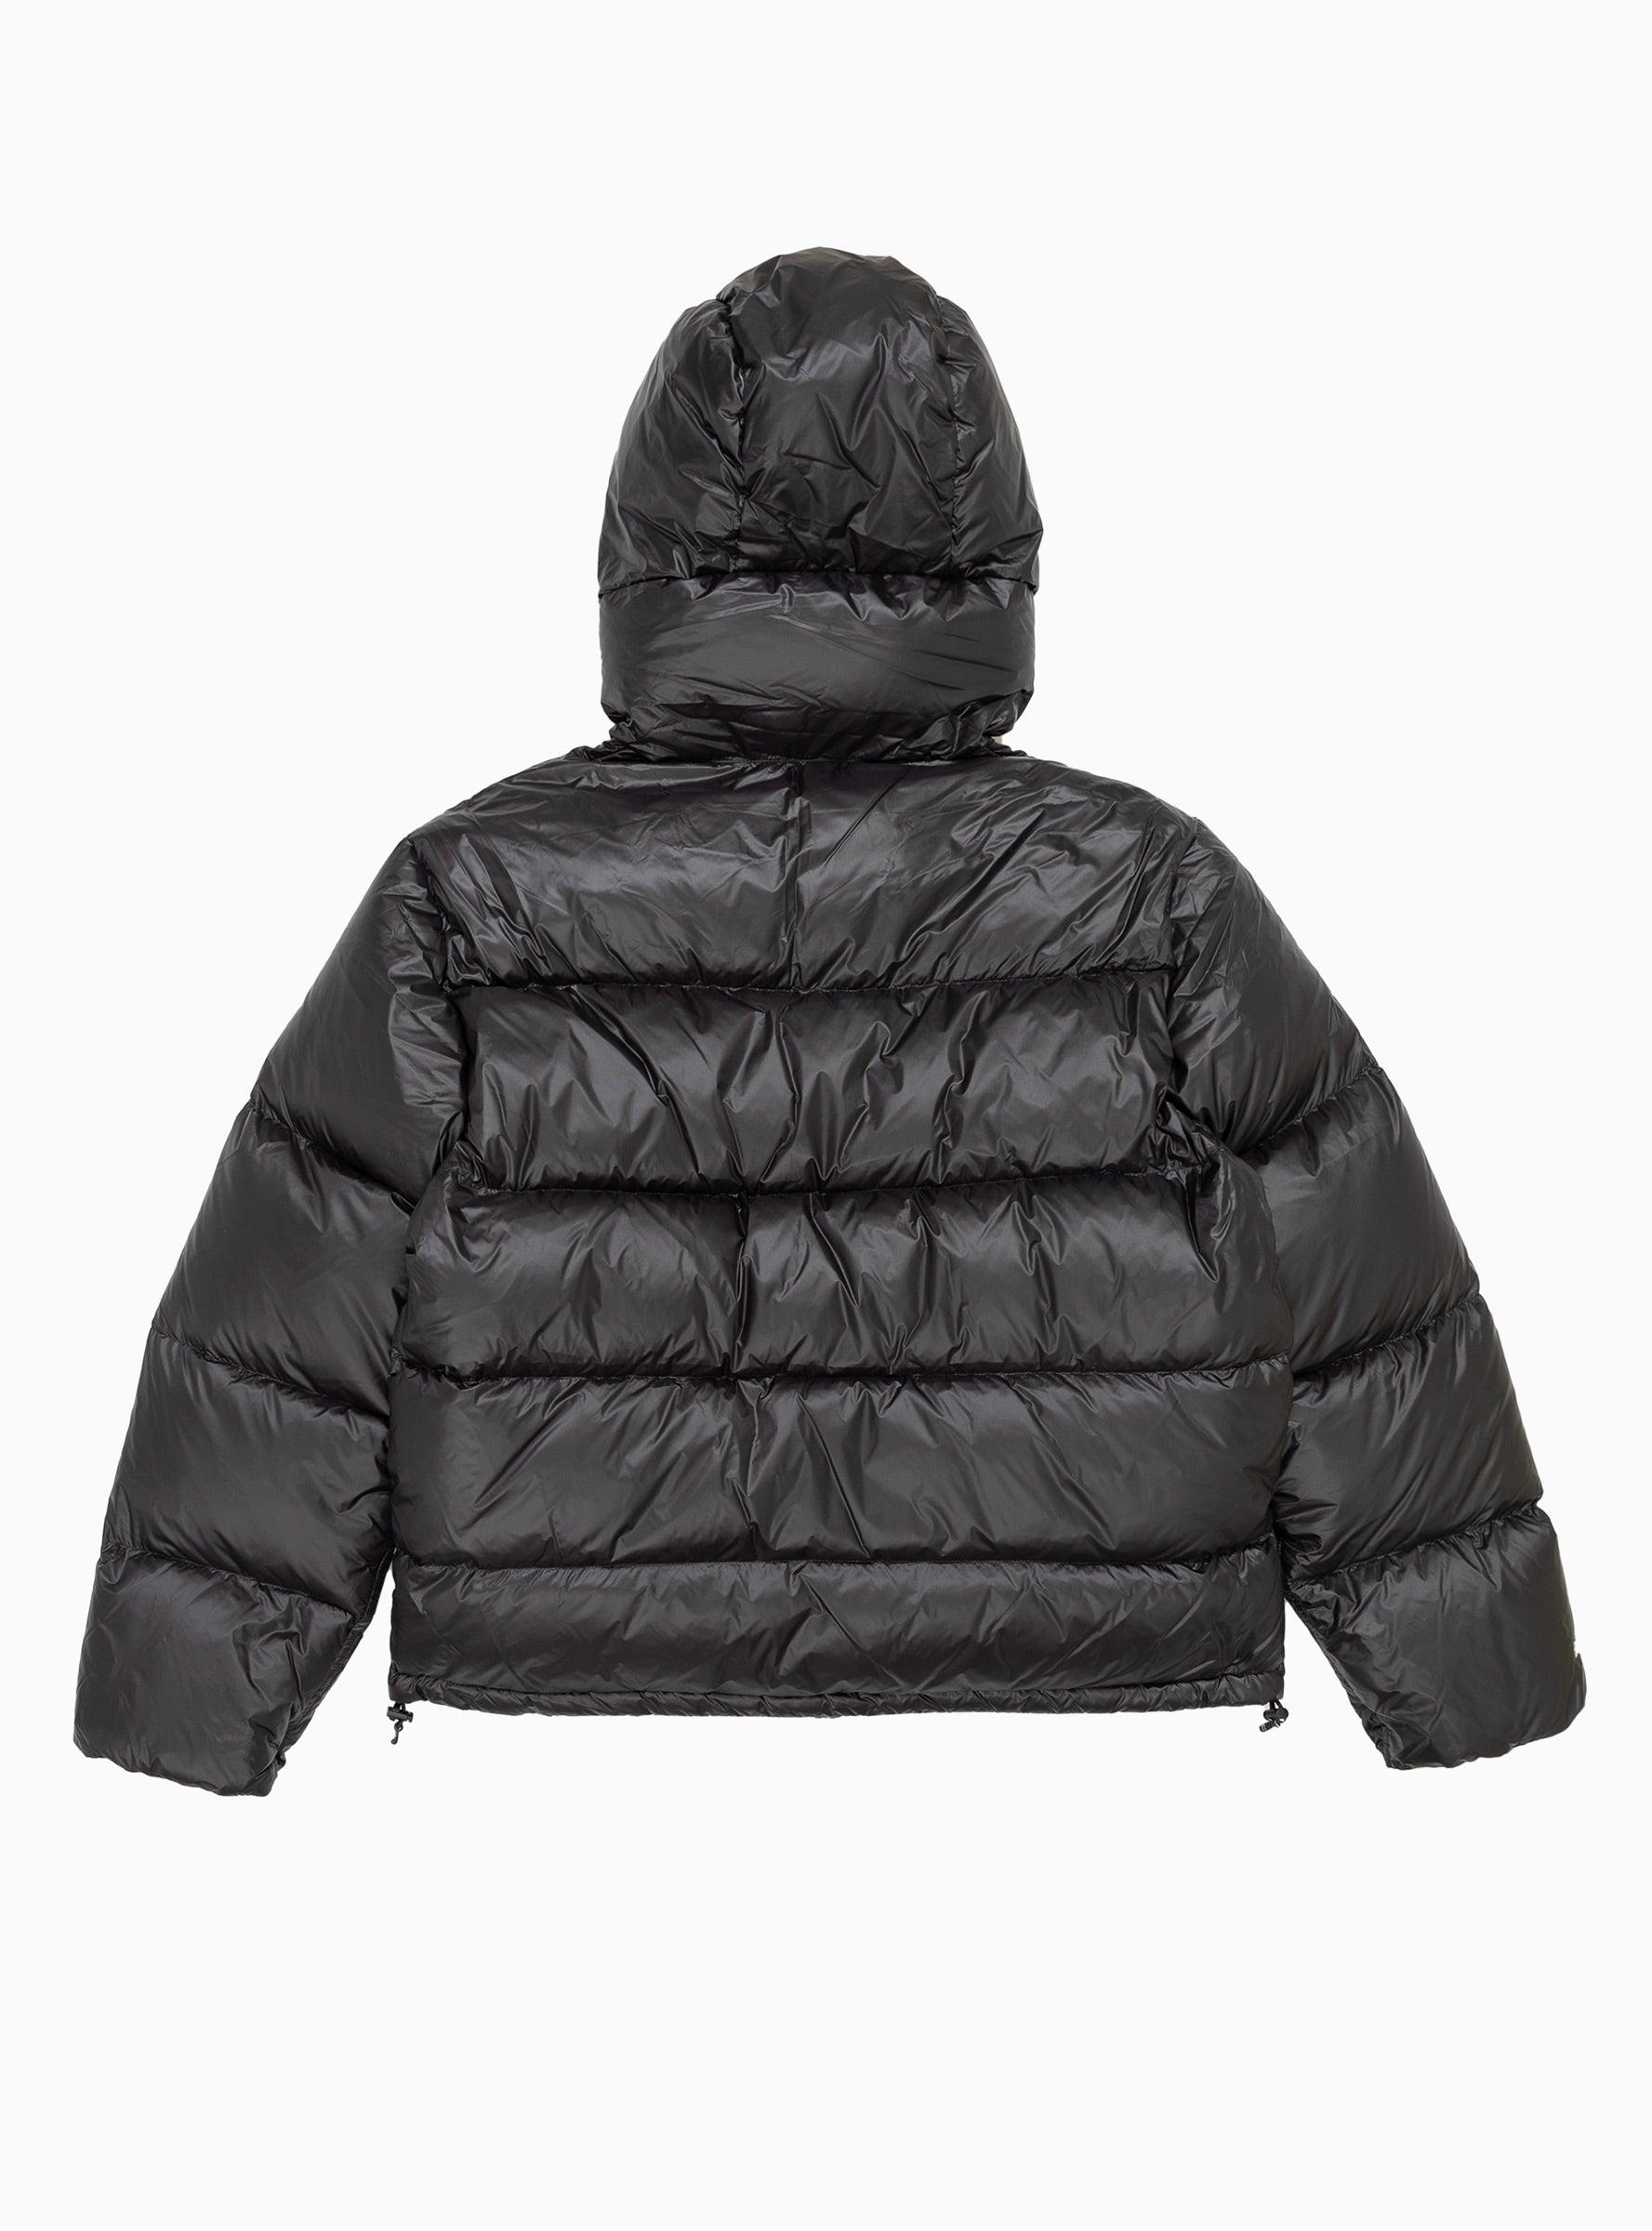 Stussy Micro Ripstop Down Puffer Jacket Black for Men | Lyst